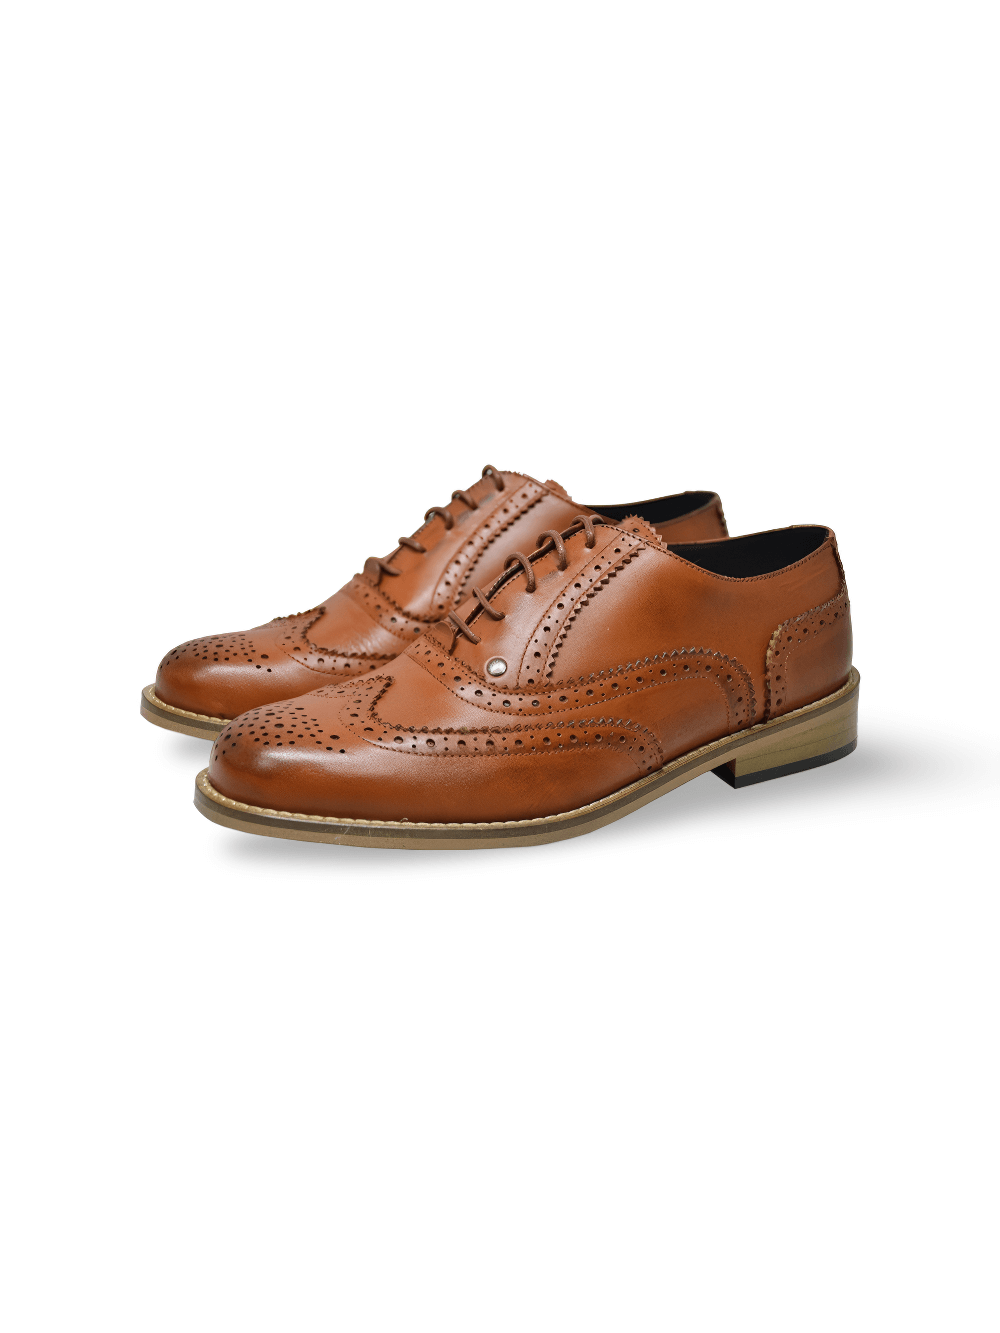 Classic Orange Grained Leather Oxford Shoes for Men